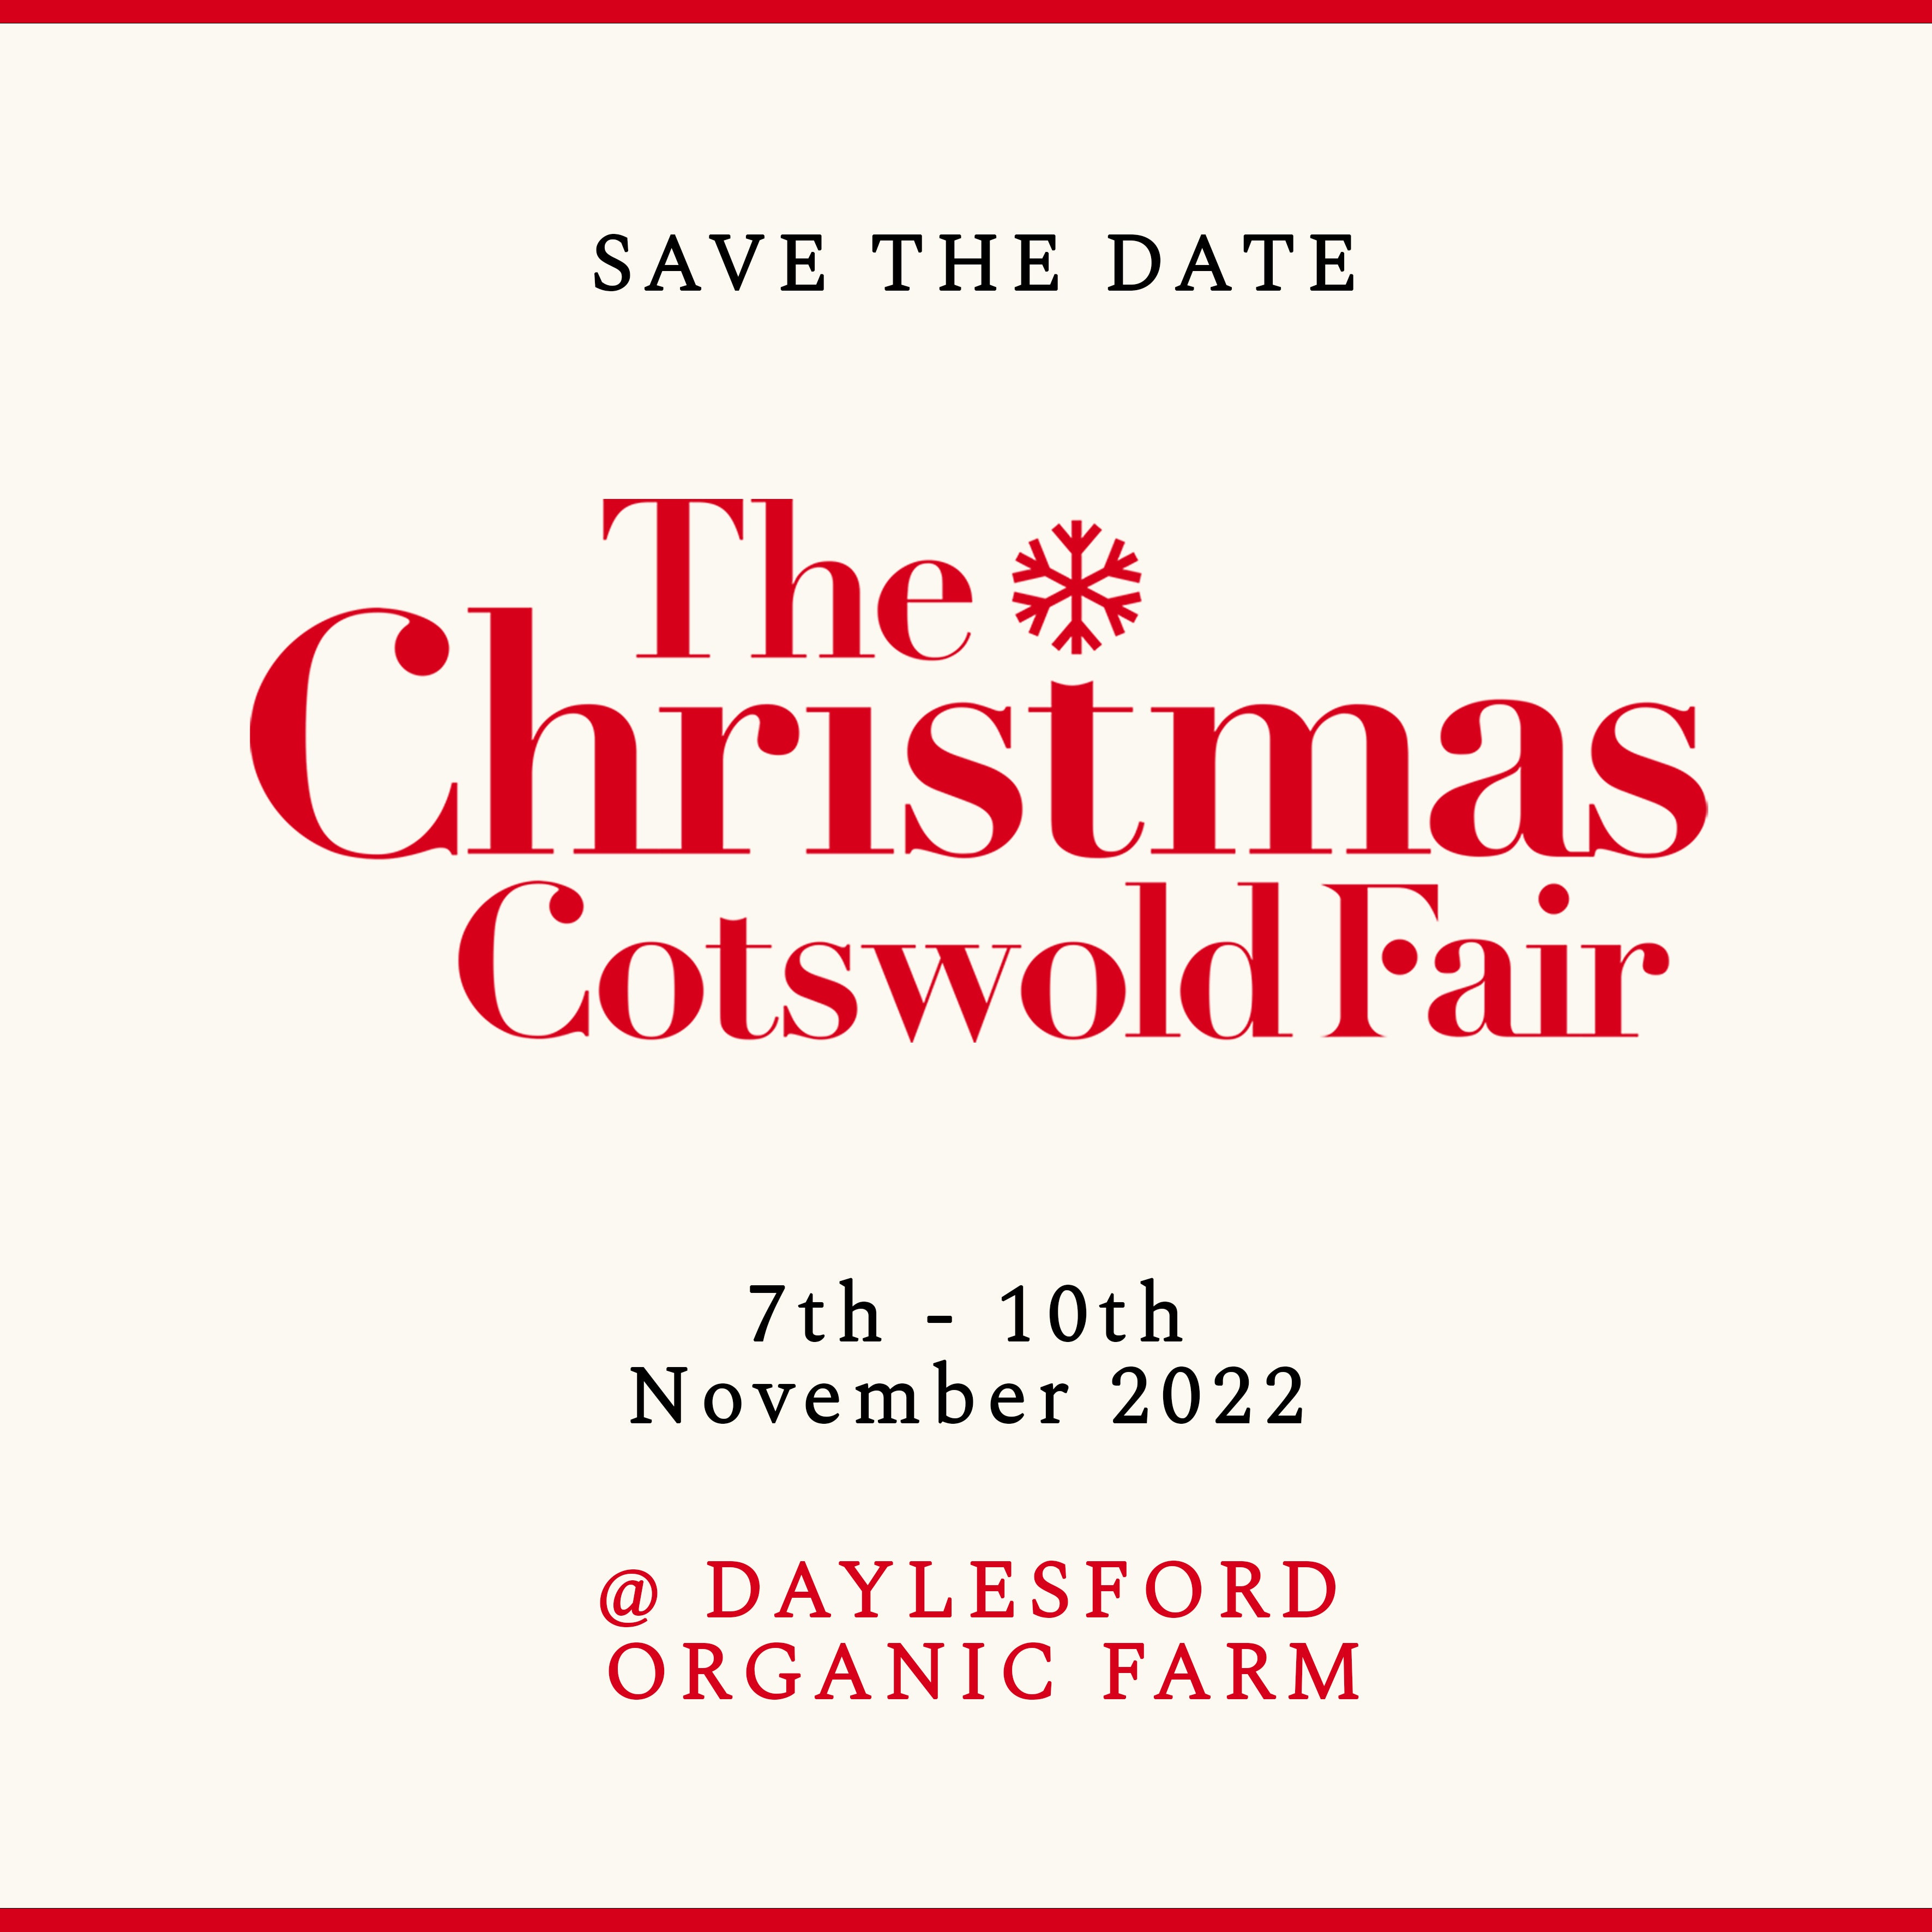 The Christmas Cotswold Fair - November 7th to 10th 2022